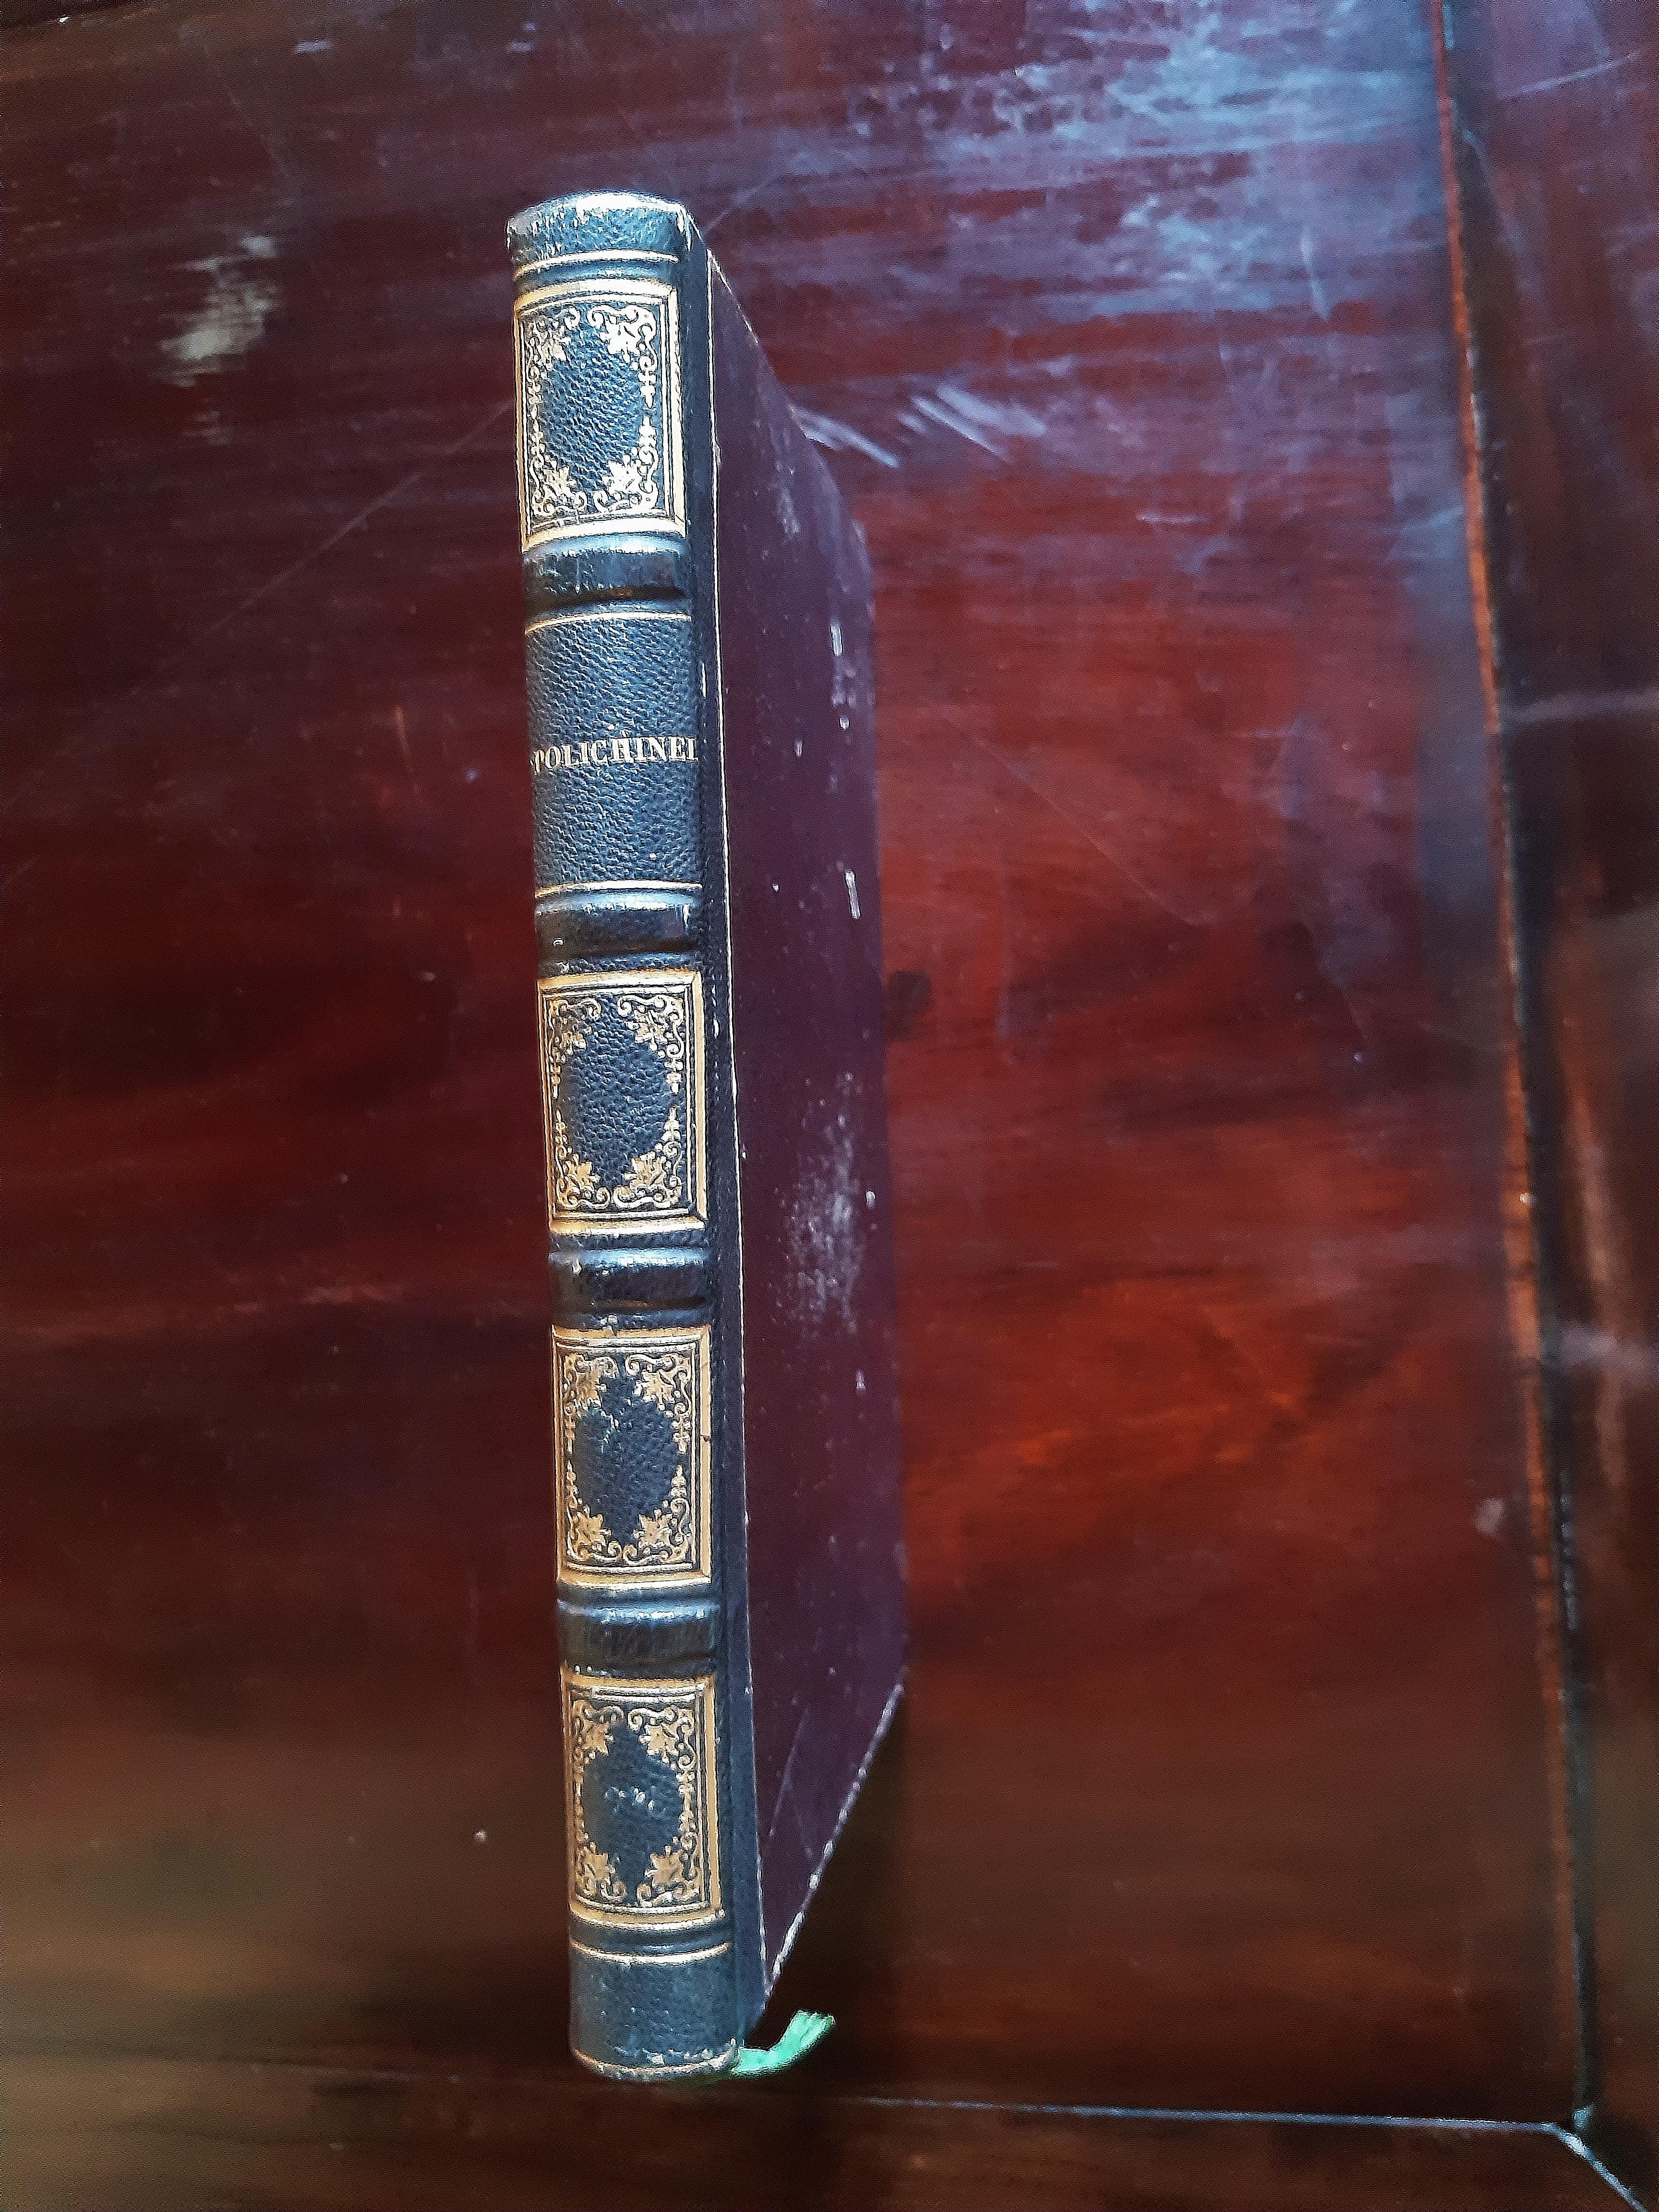 Polichinel ex-roi des Marionnettes devenu philosophe is an original modern rare book illustrated by Alcide-Joseph Lorentz (1813-1891) in 1848.

Original Edition.

Published by Willermy, Paris.

Format: in 8°. The dimensions and the weight of the